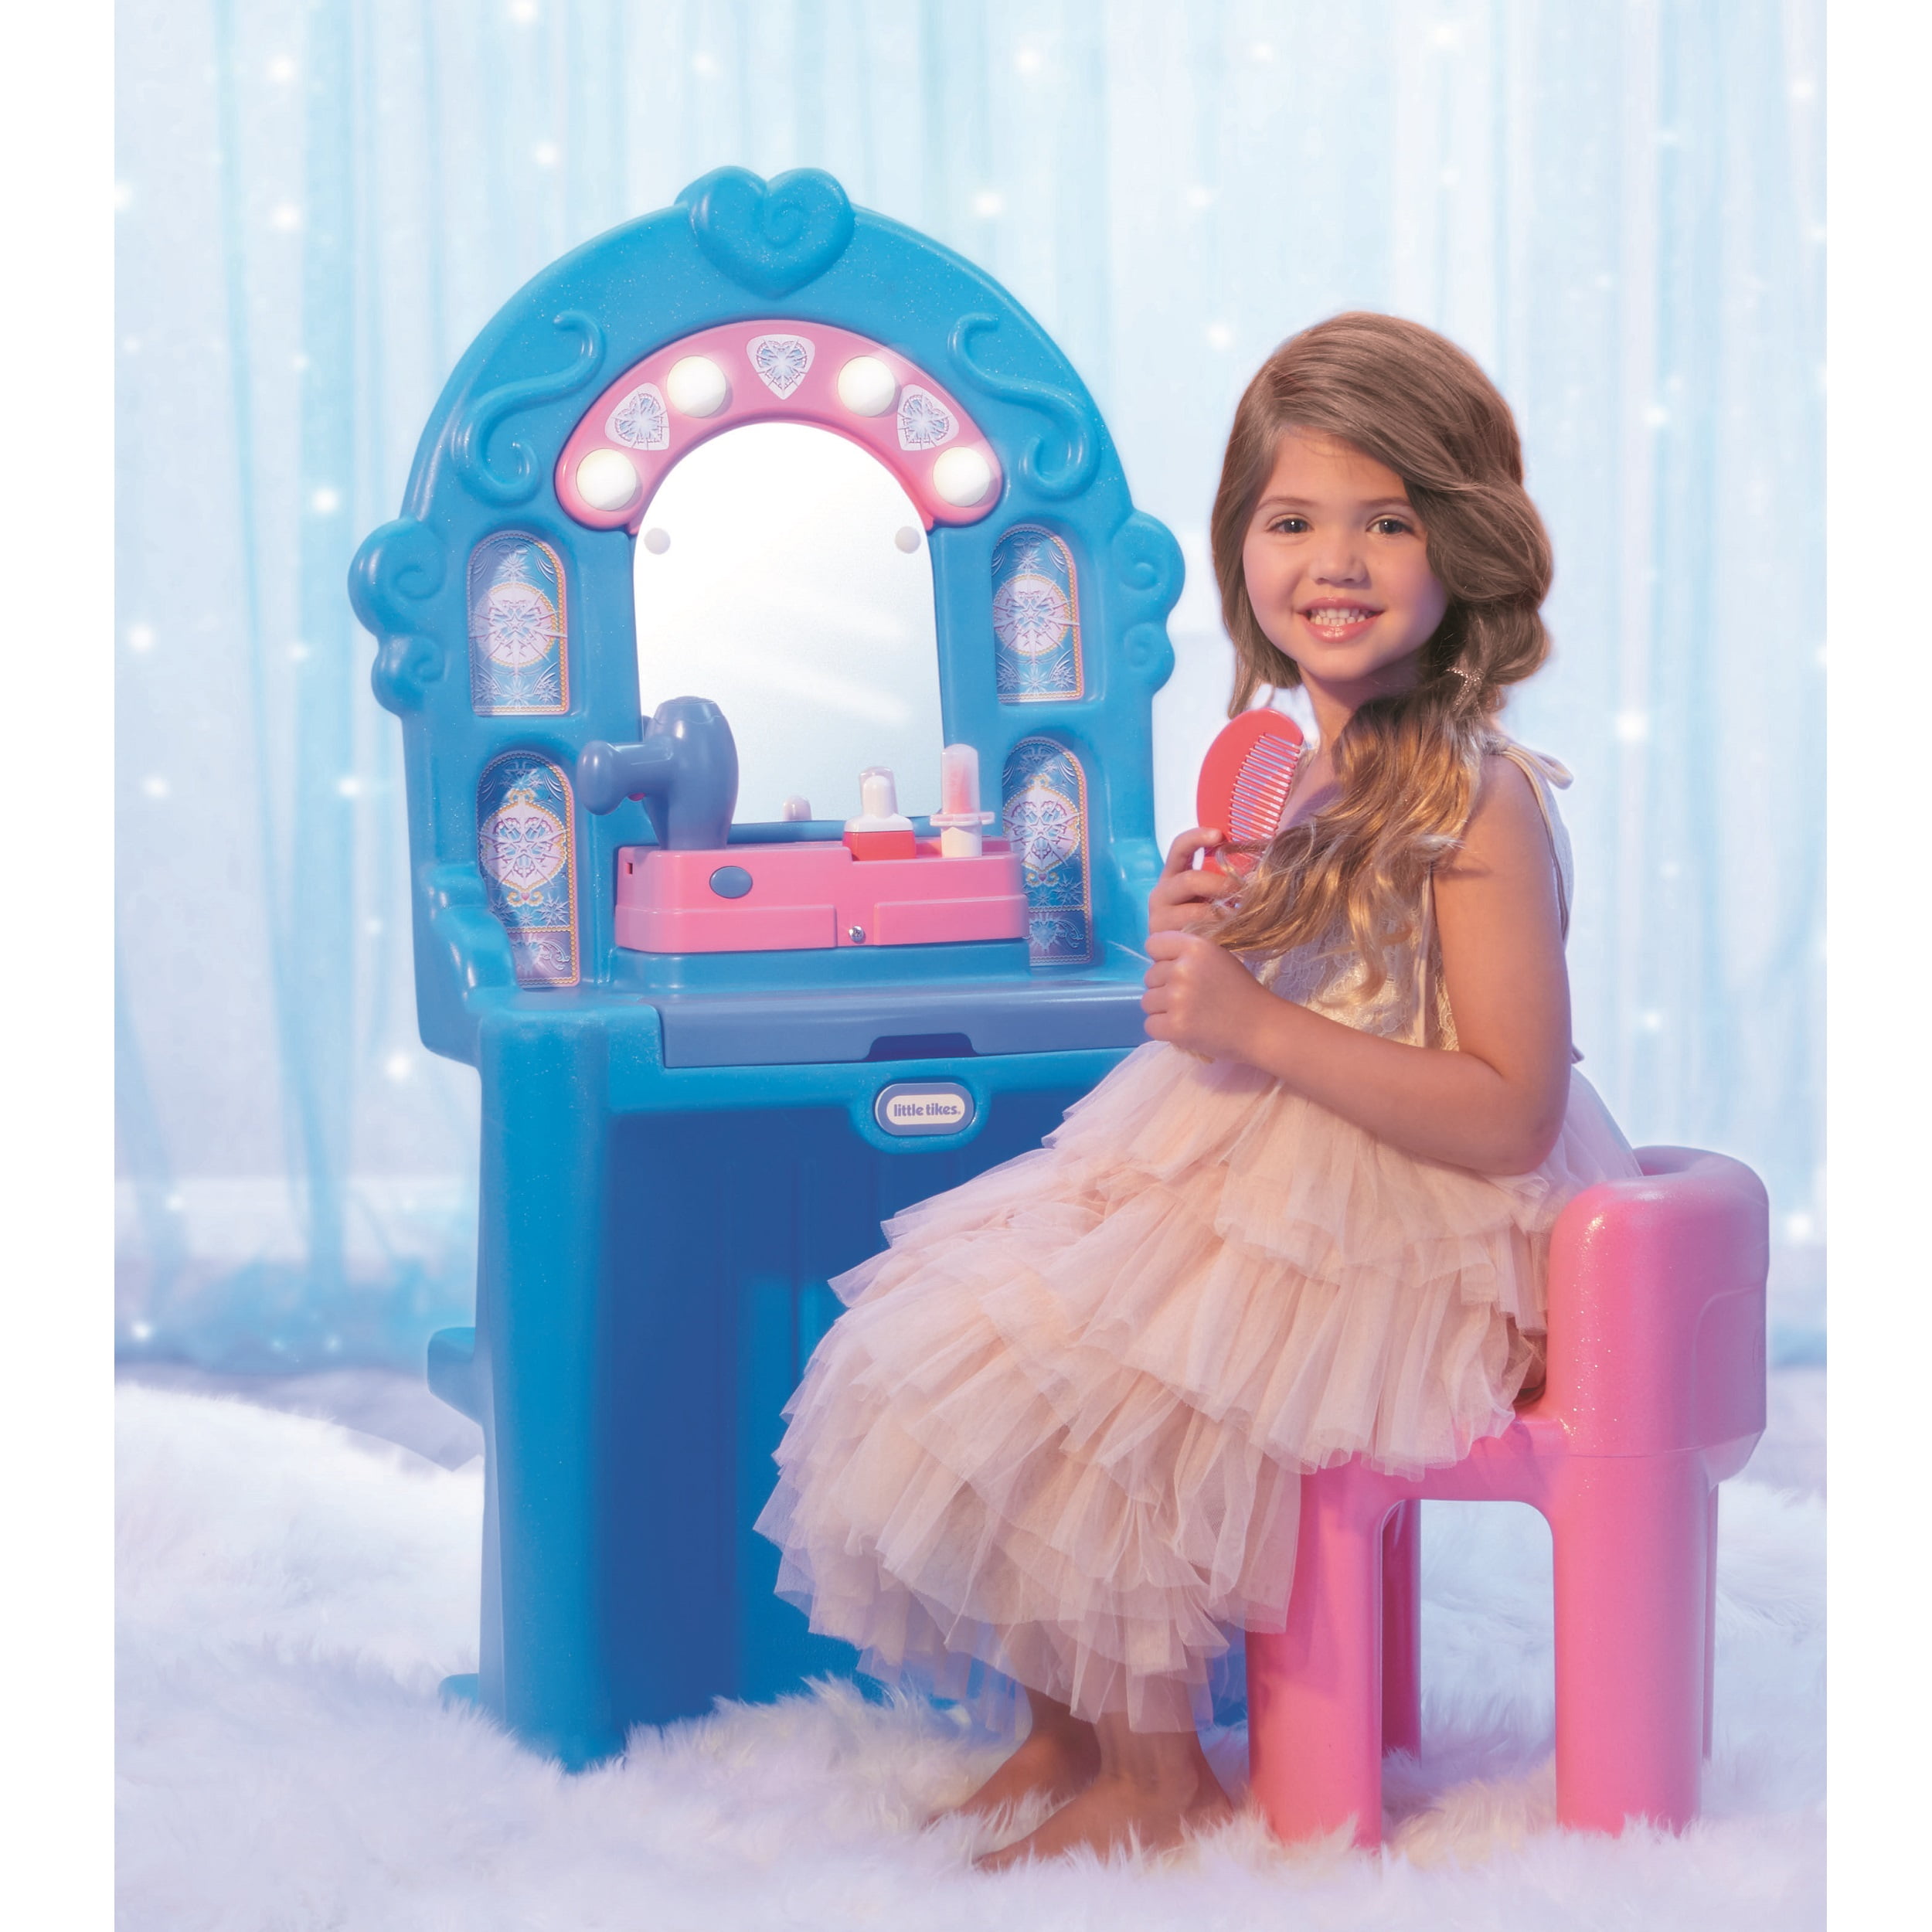 Little Tikes Ice Princess Magic Mirror Toy Vanity Table and Chair with Lights, Sounds and Pretend Play Toy Beauty Accessories- For Kids Toddlers Girls Boys Ages 3 4 5+